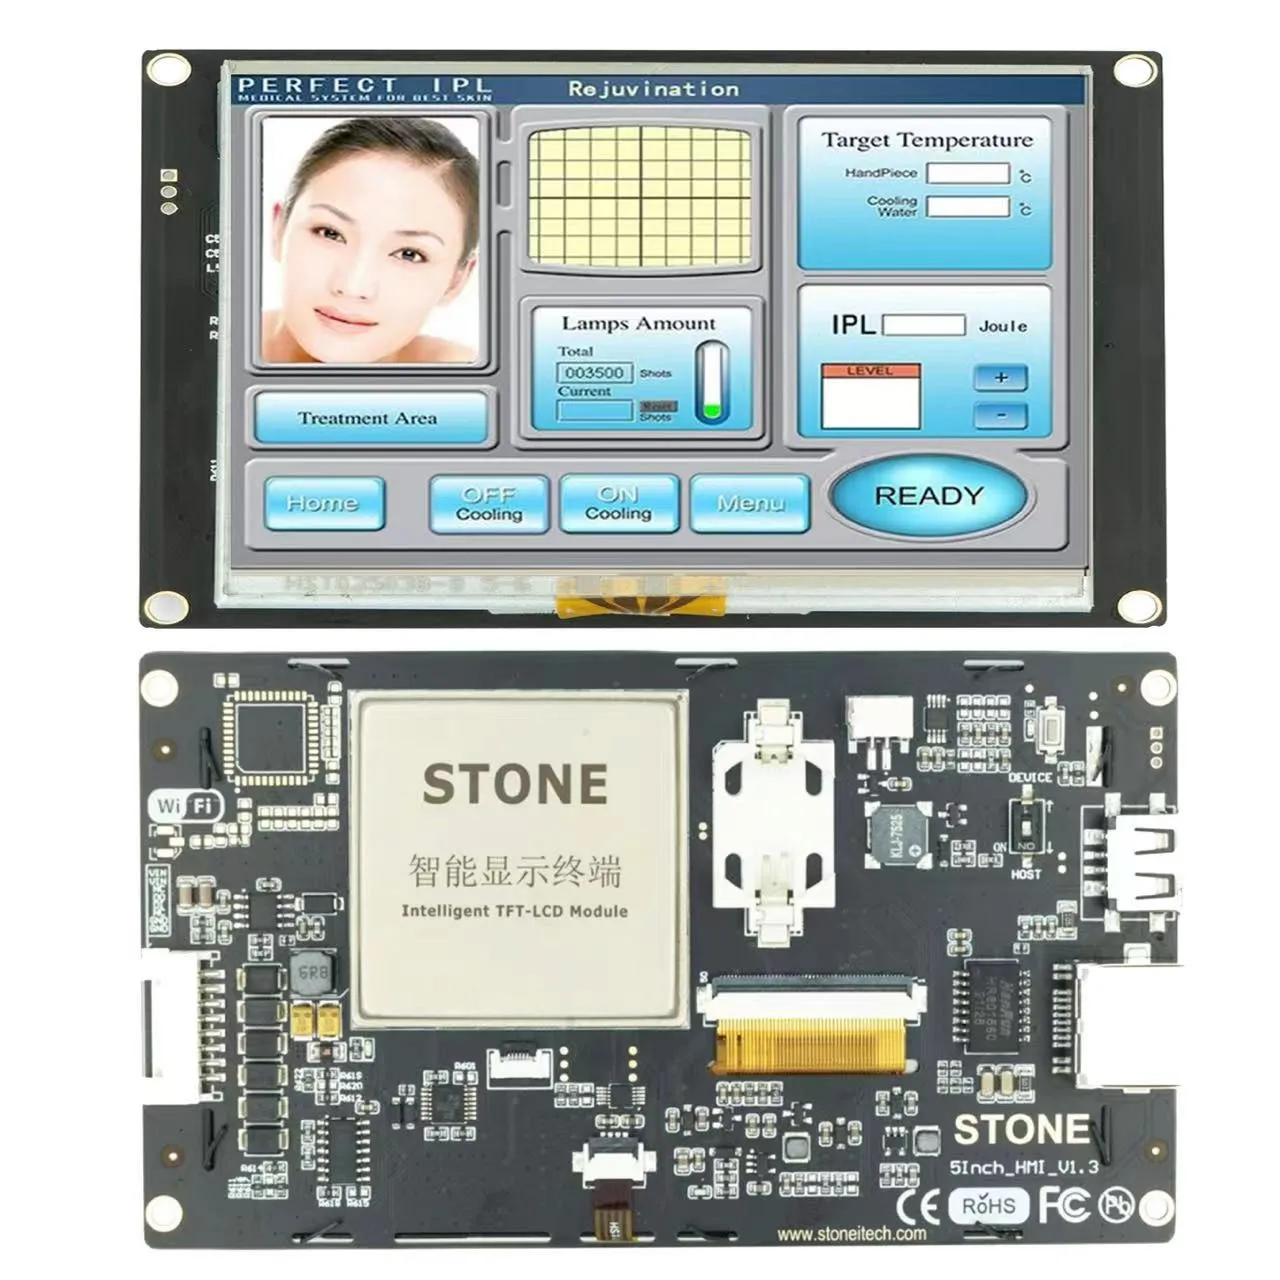 5 Inch HMI Graphic Touch Screen with Controller + Program + UART Serial Interface for Industrial Equipment C5